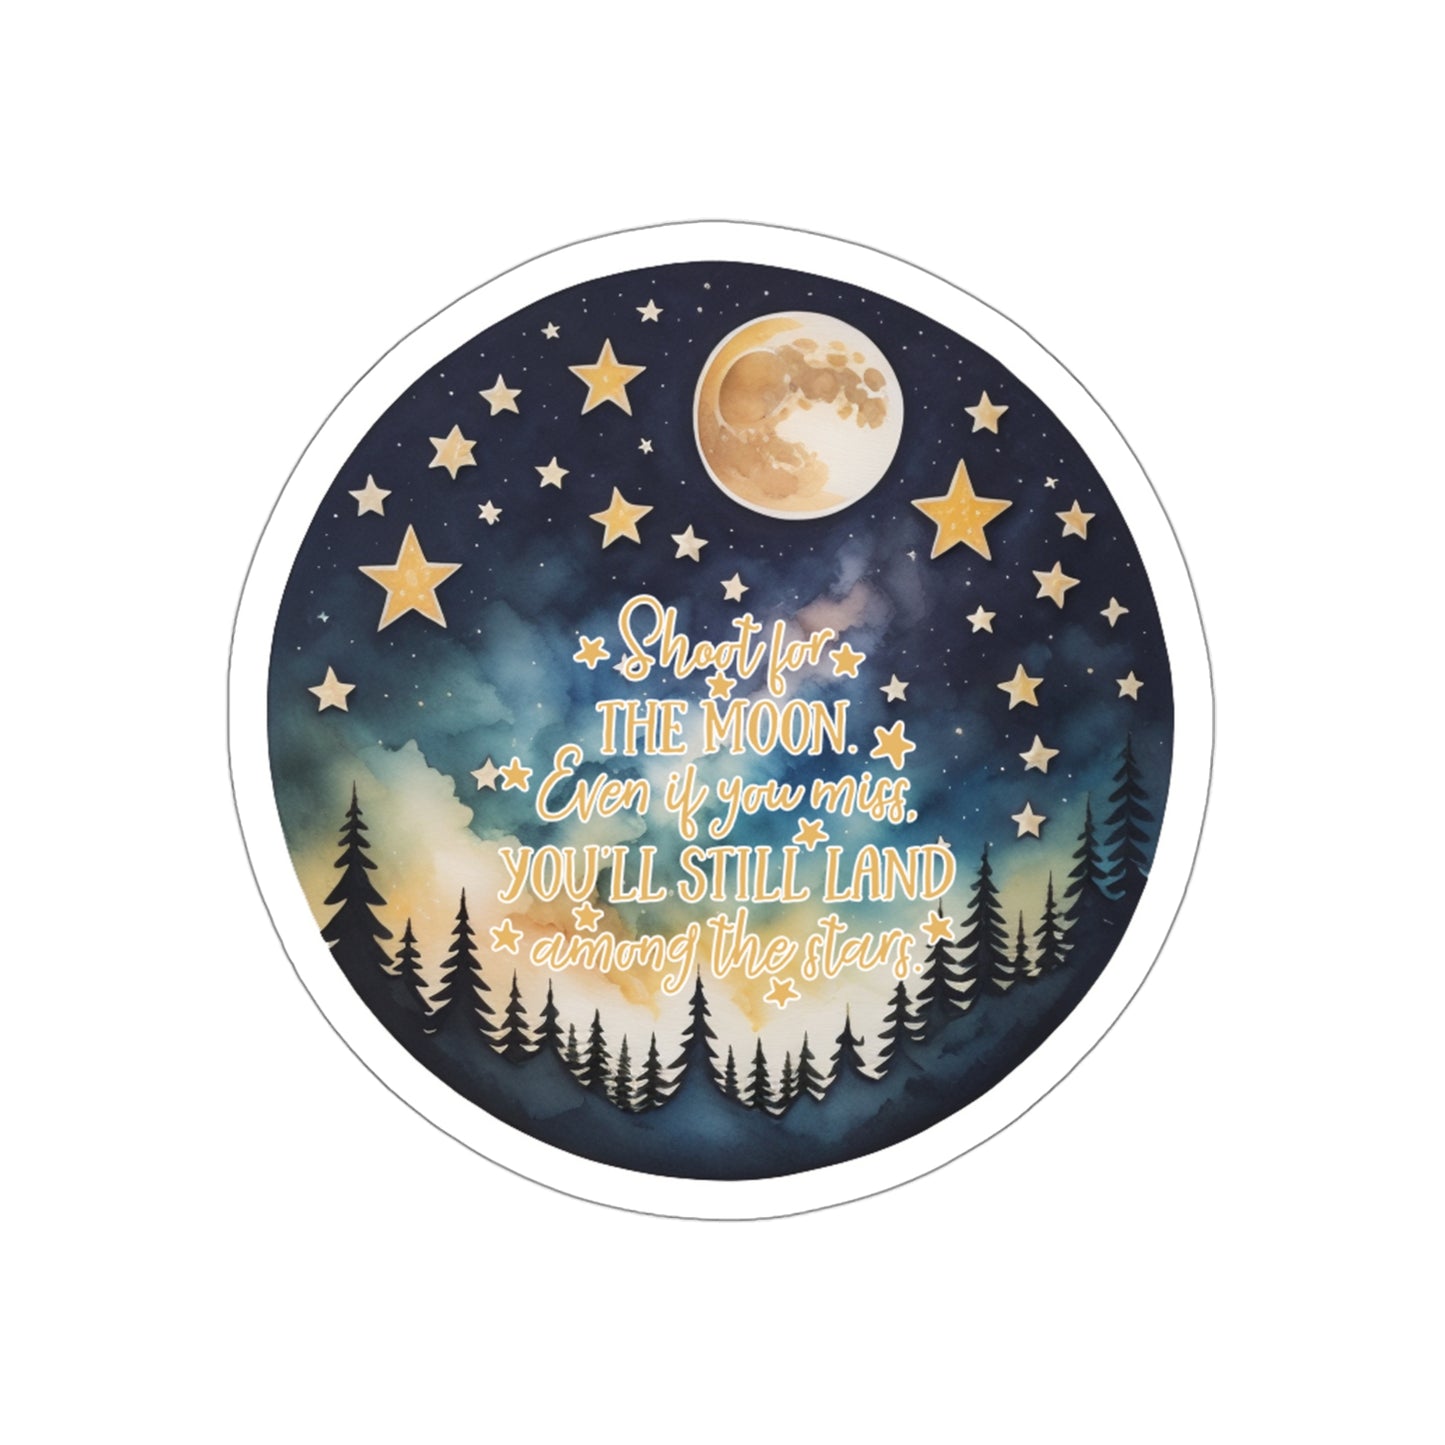 Shoot for the Moon Sticker Watercolor | Fun Stickers | Happy Stickers | Must Have Stickers | Laptop Stickers | Best Stickers | Gift Idea